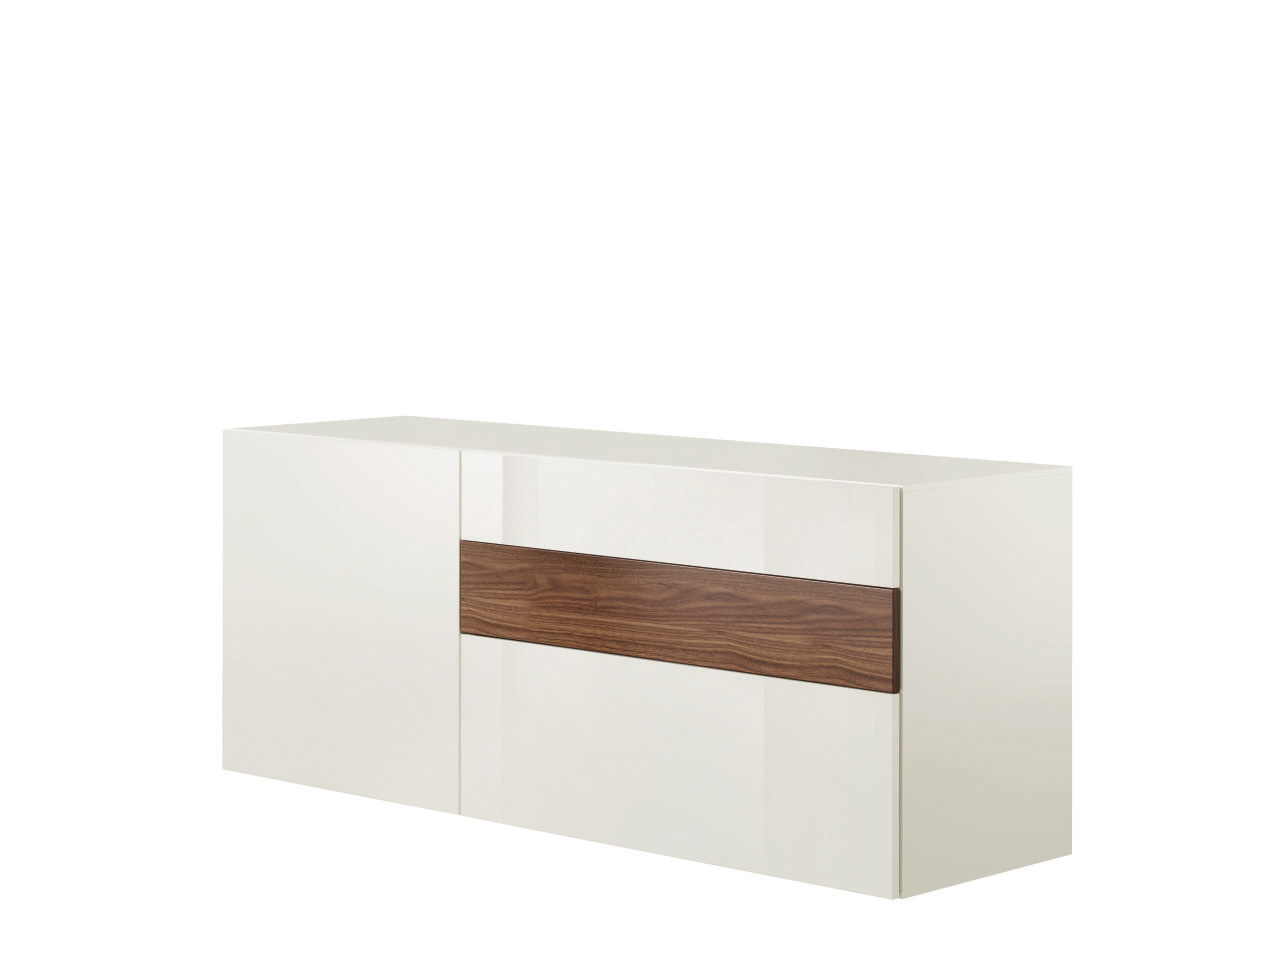 now! by hülsta. vision | Sideboard | B: 176,1 cm